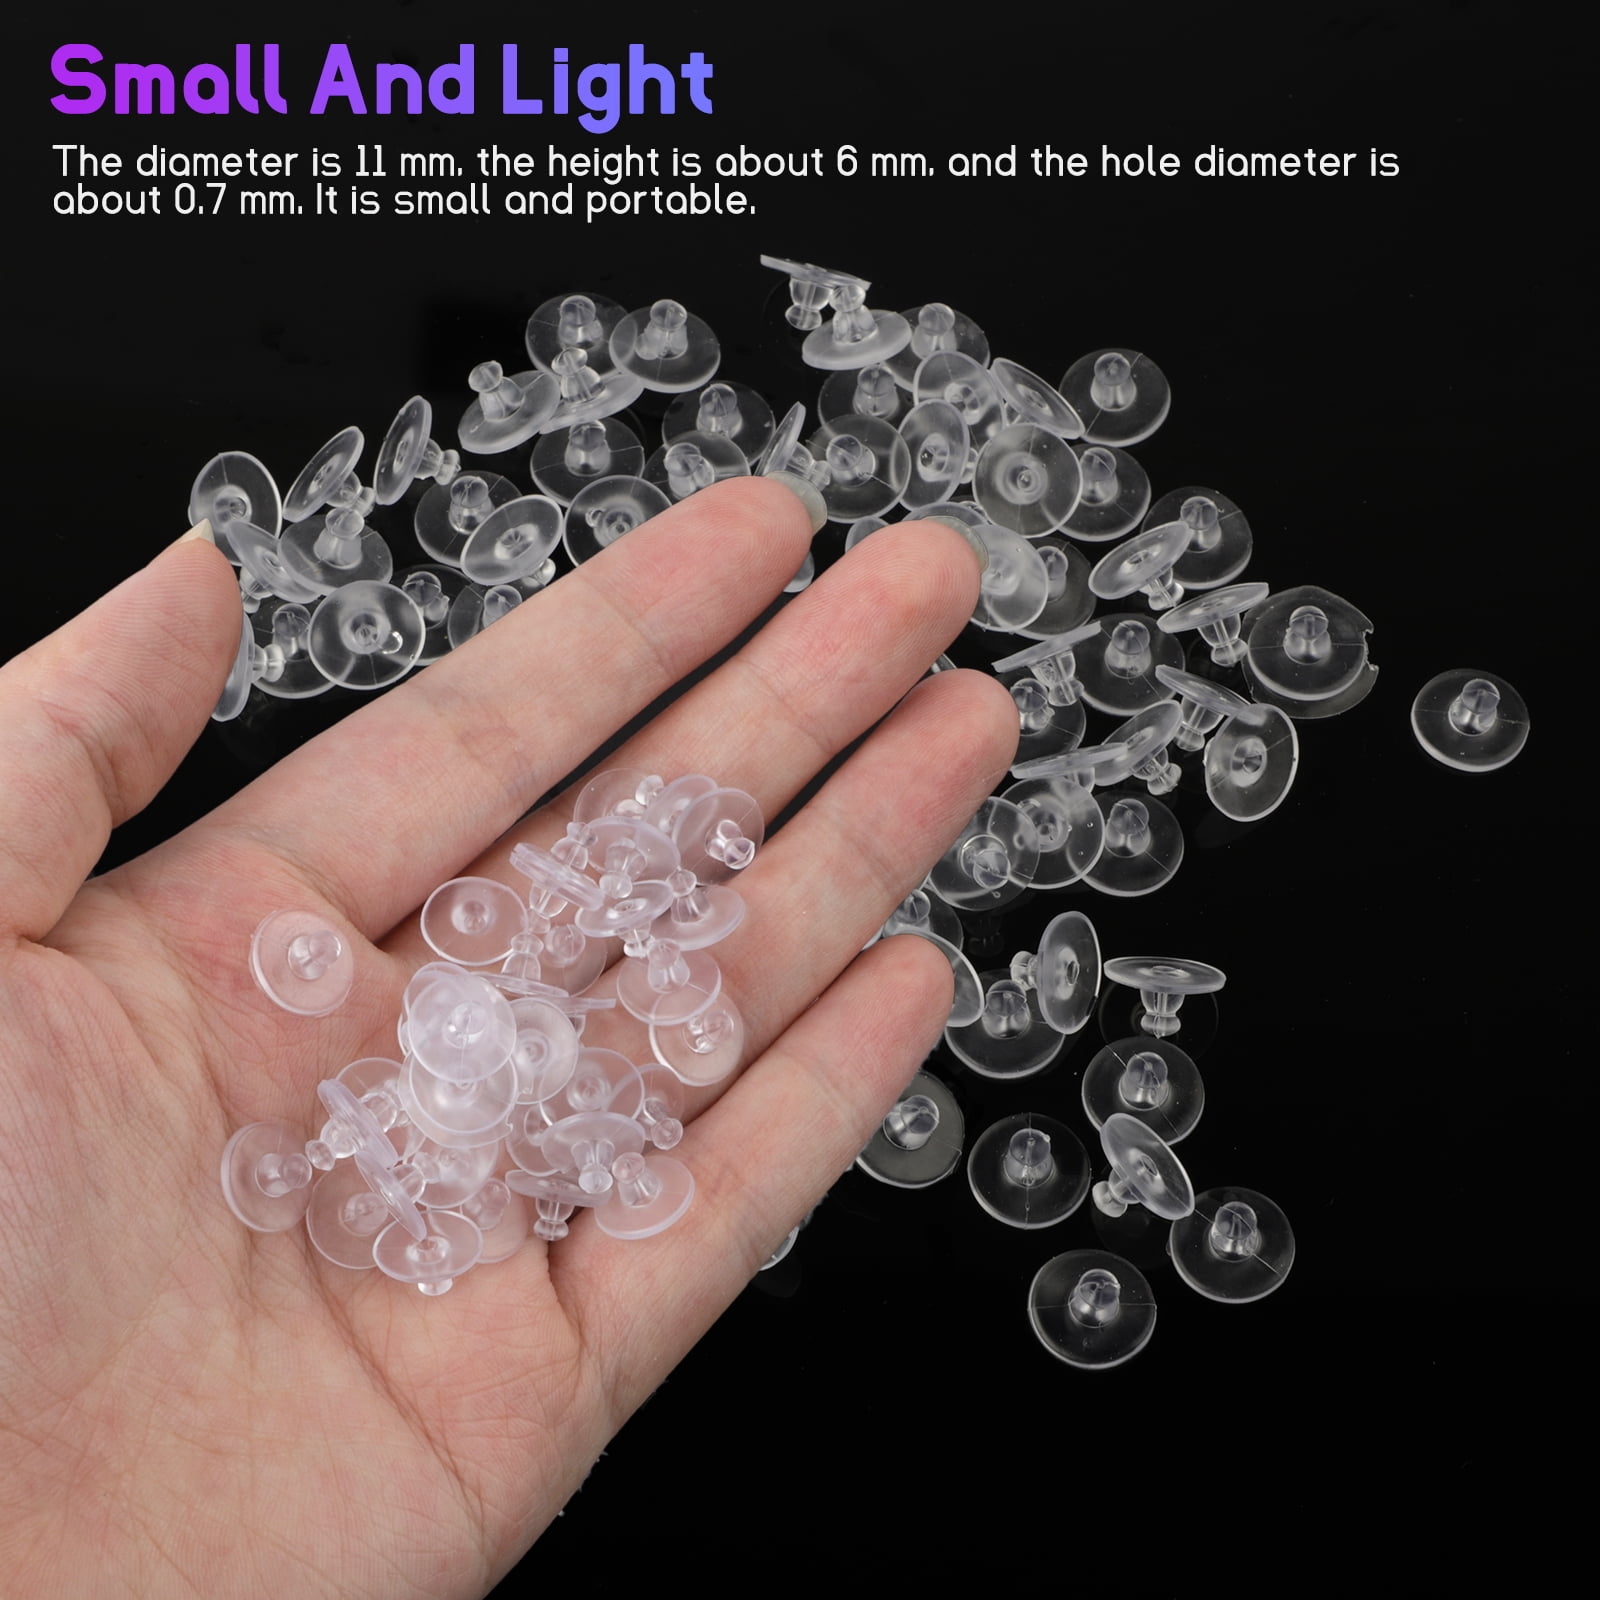 1,000 Pieces Clear Silicone Bullet Clutch Style Soft Earring Safety Backs  Ear Nut Earring Wire Stopper for Fish Hook Earrings 